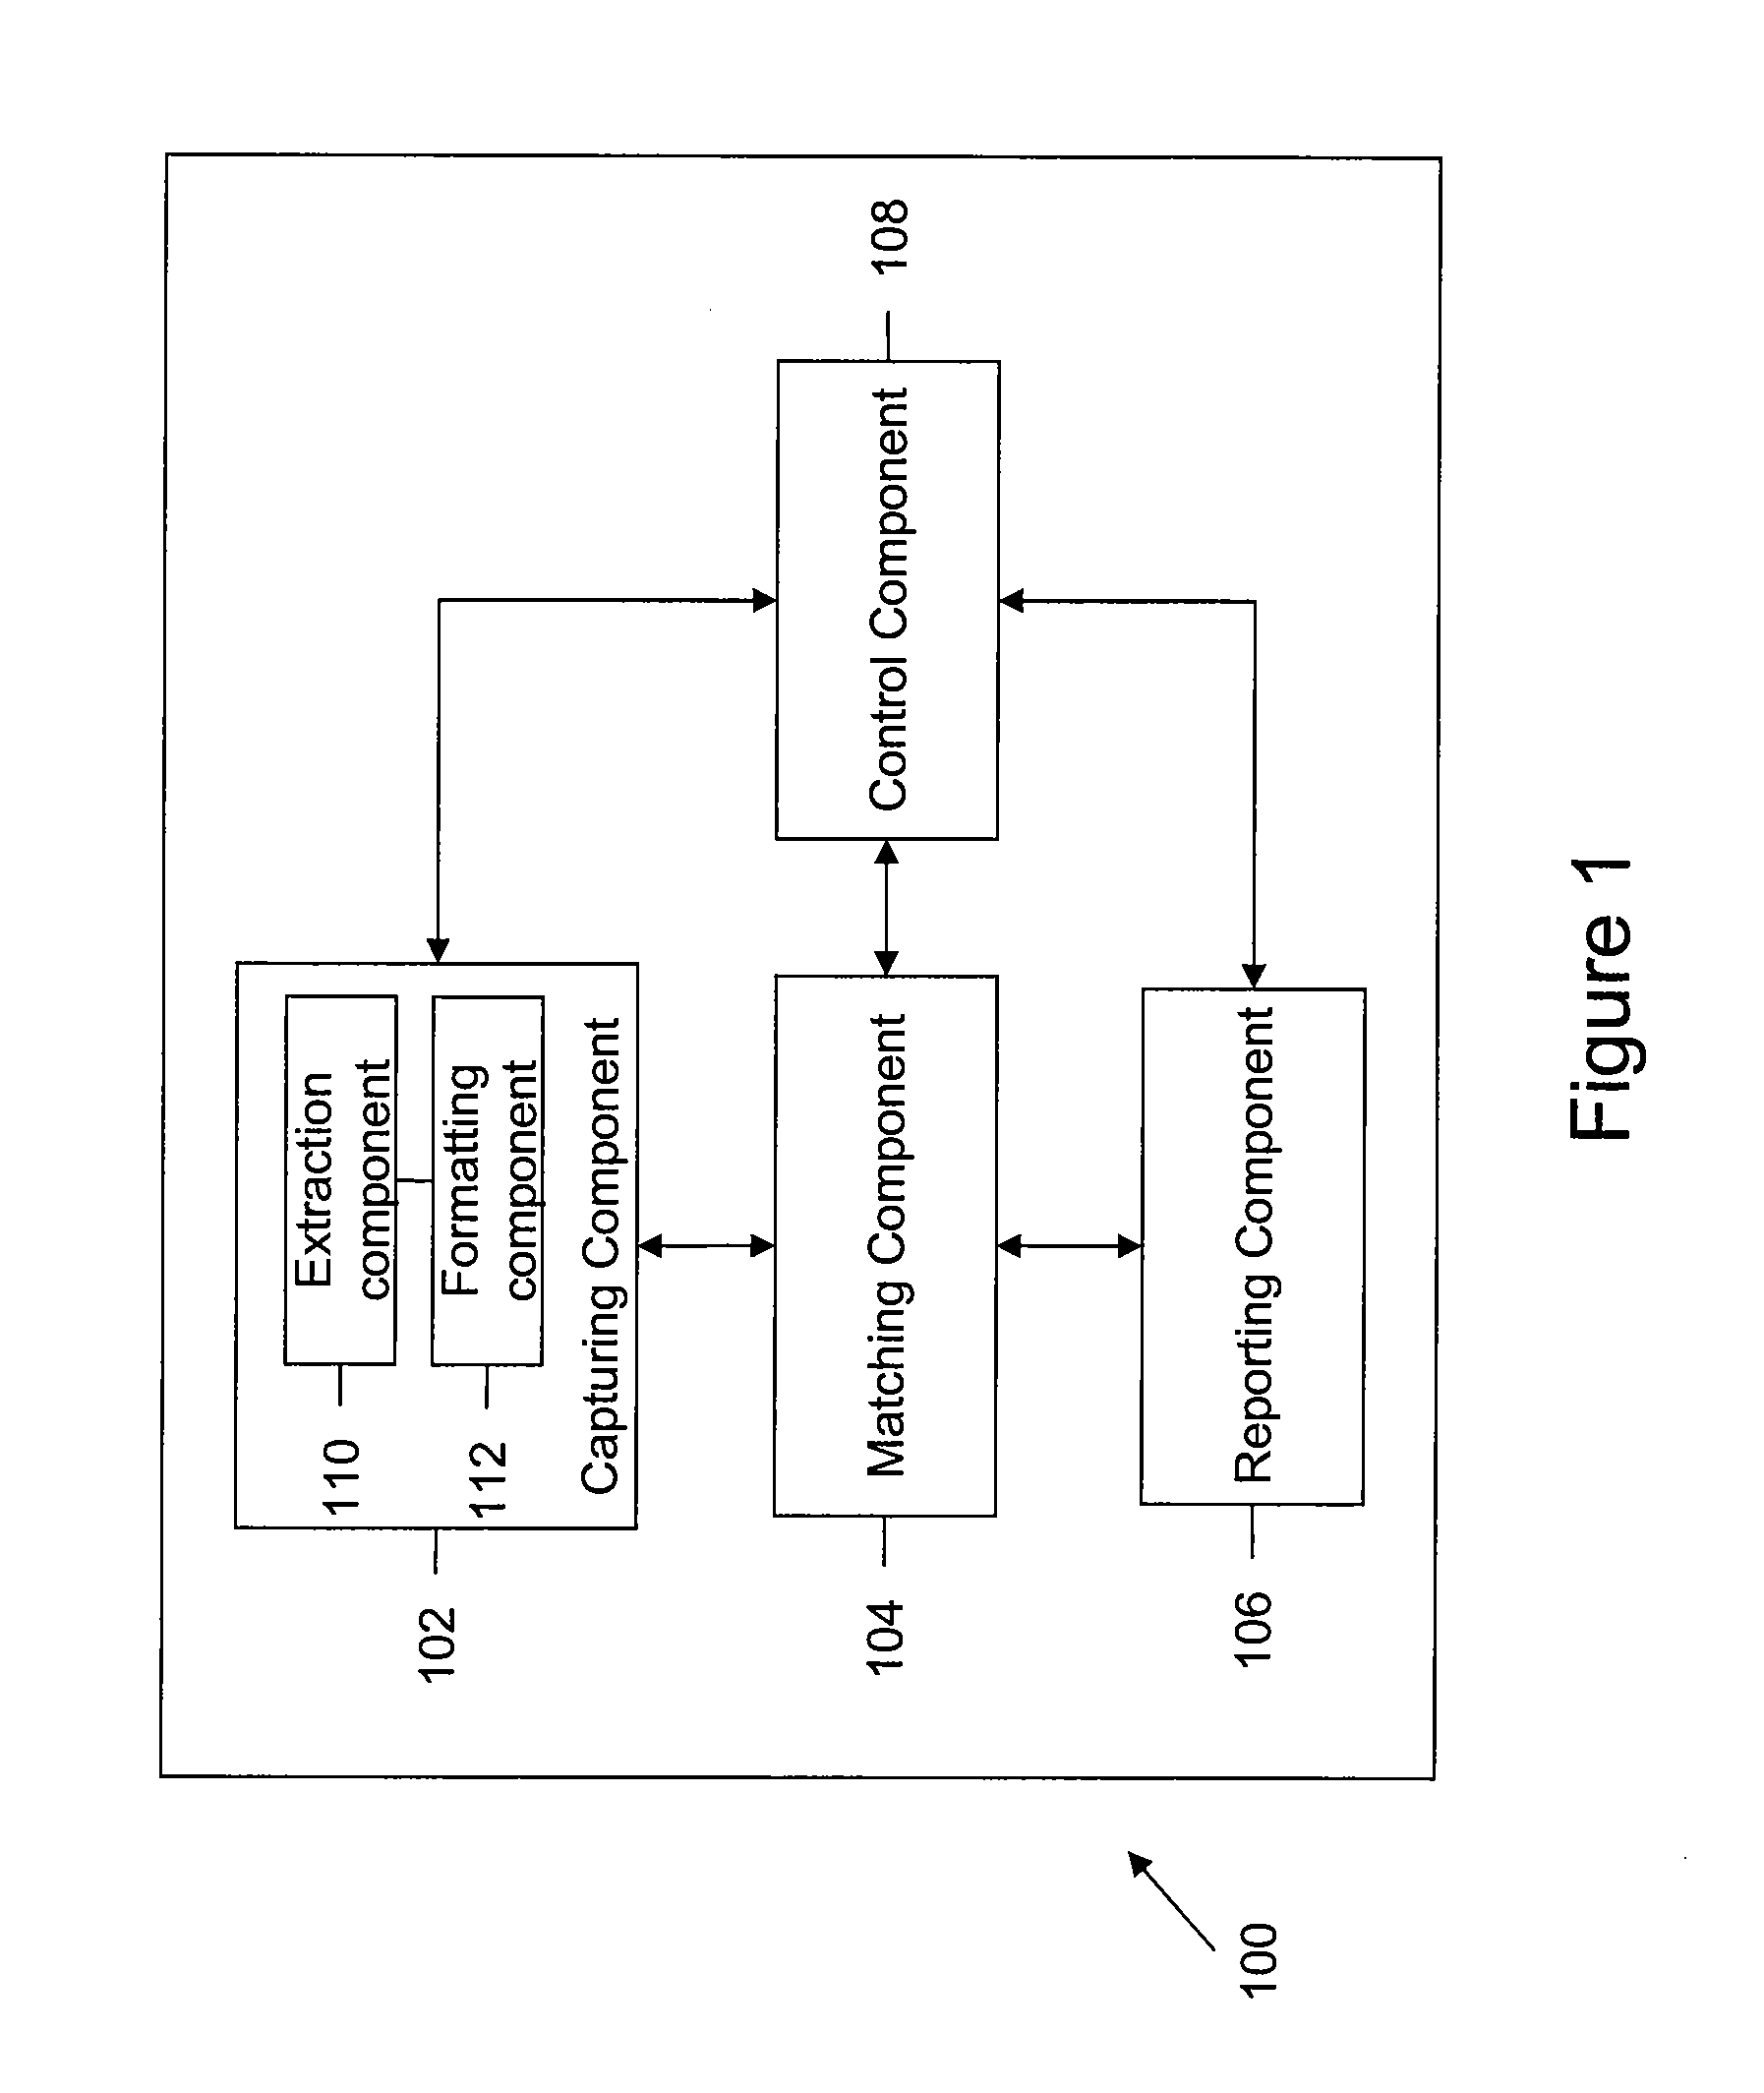 System and Method for Reconciling One or More Financial Transactions